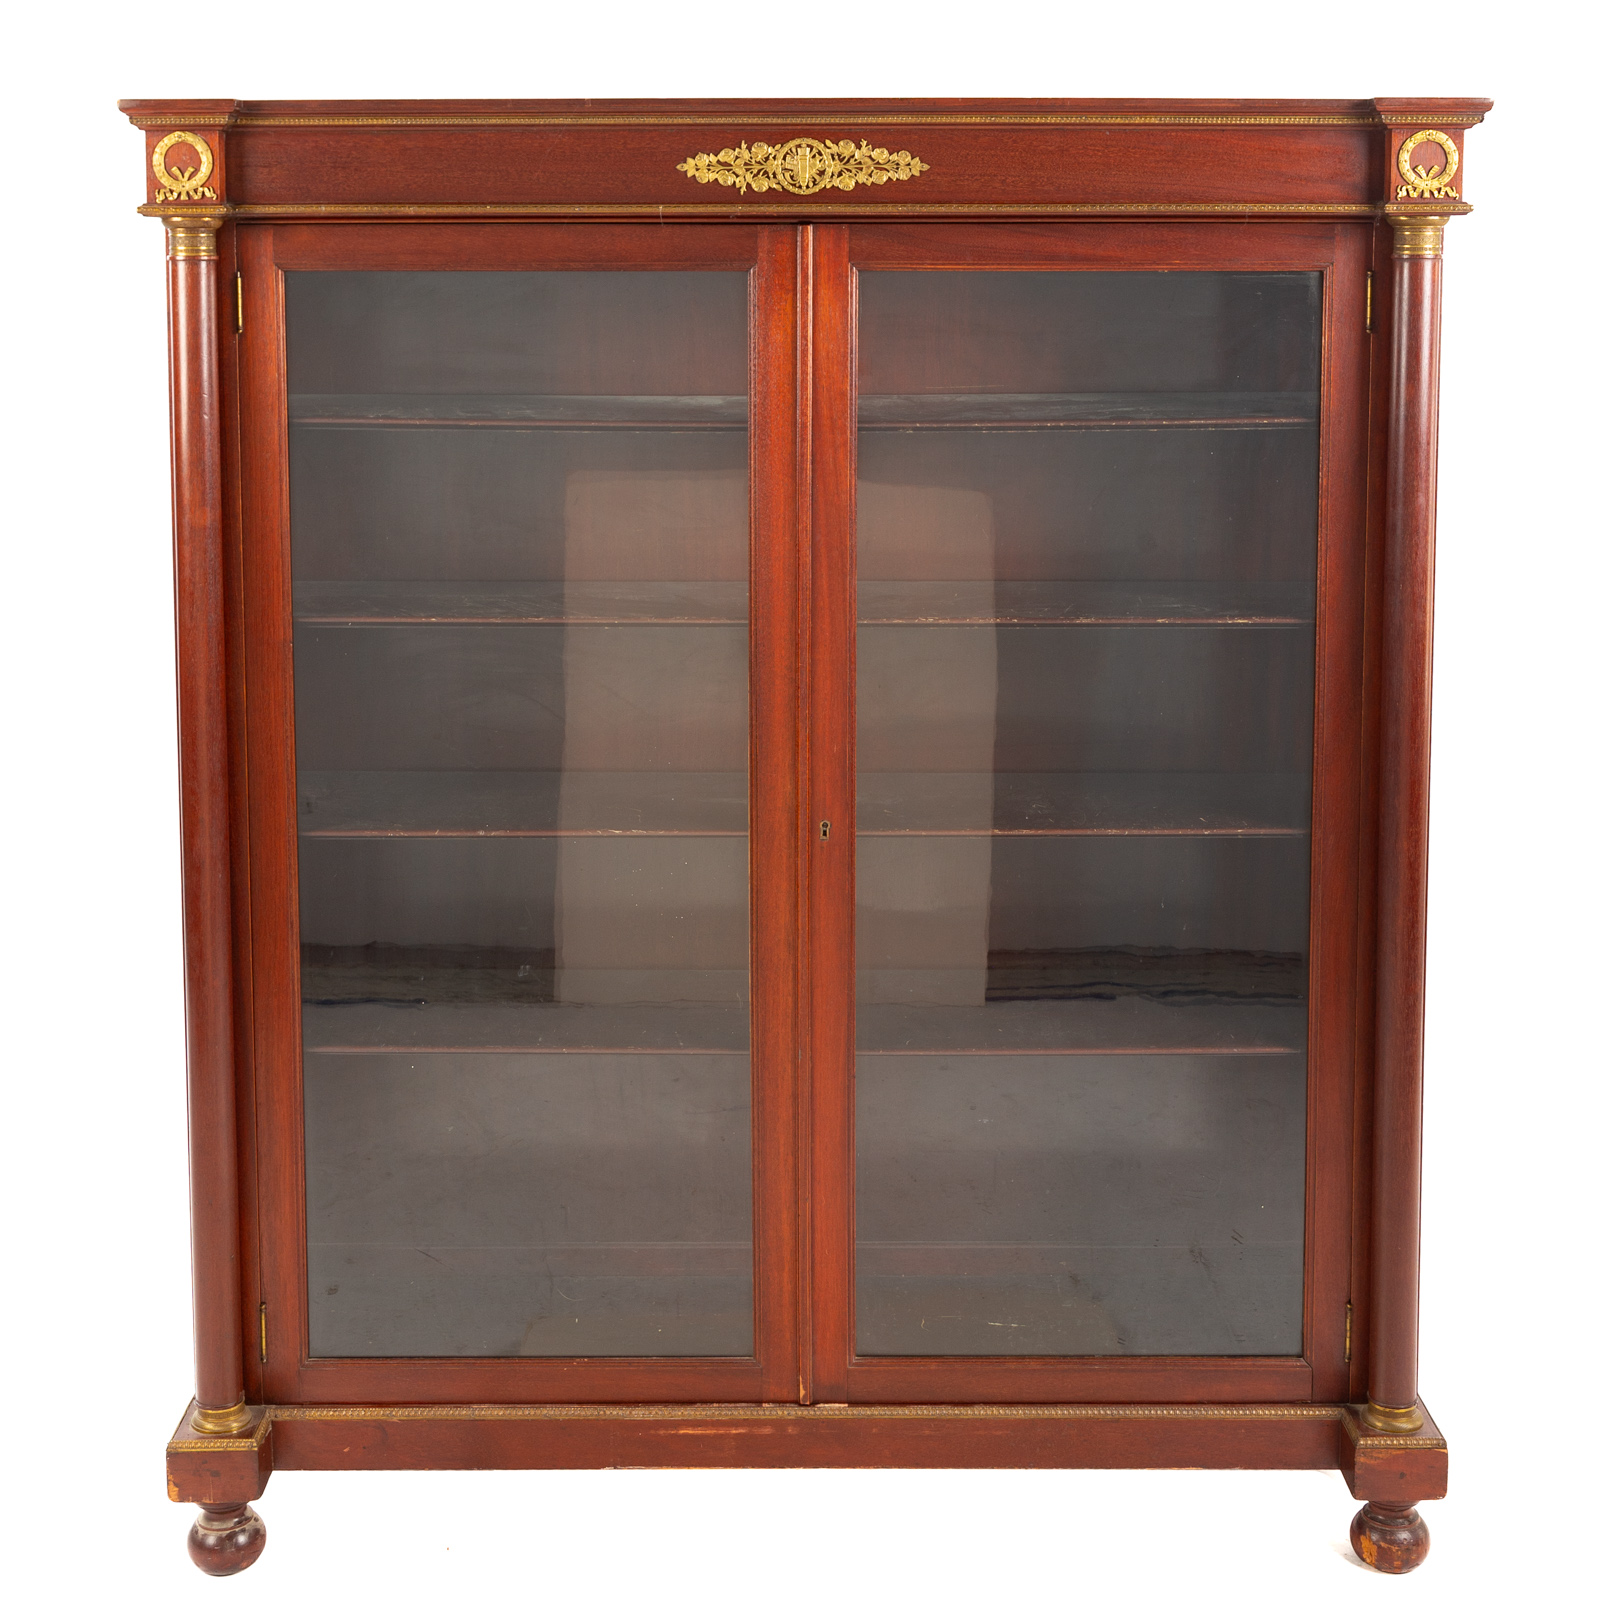 FRENCH EMPIRE STYLE BOOKCASE Early 3cadee